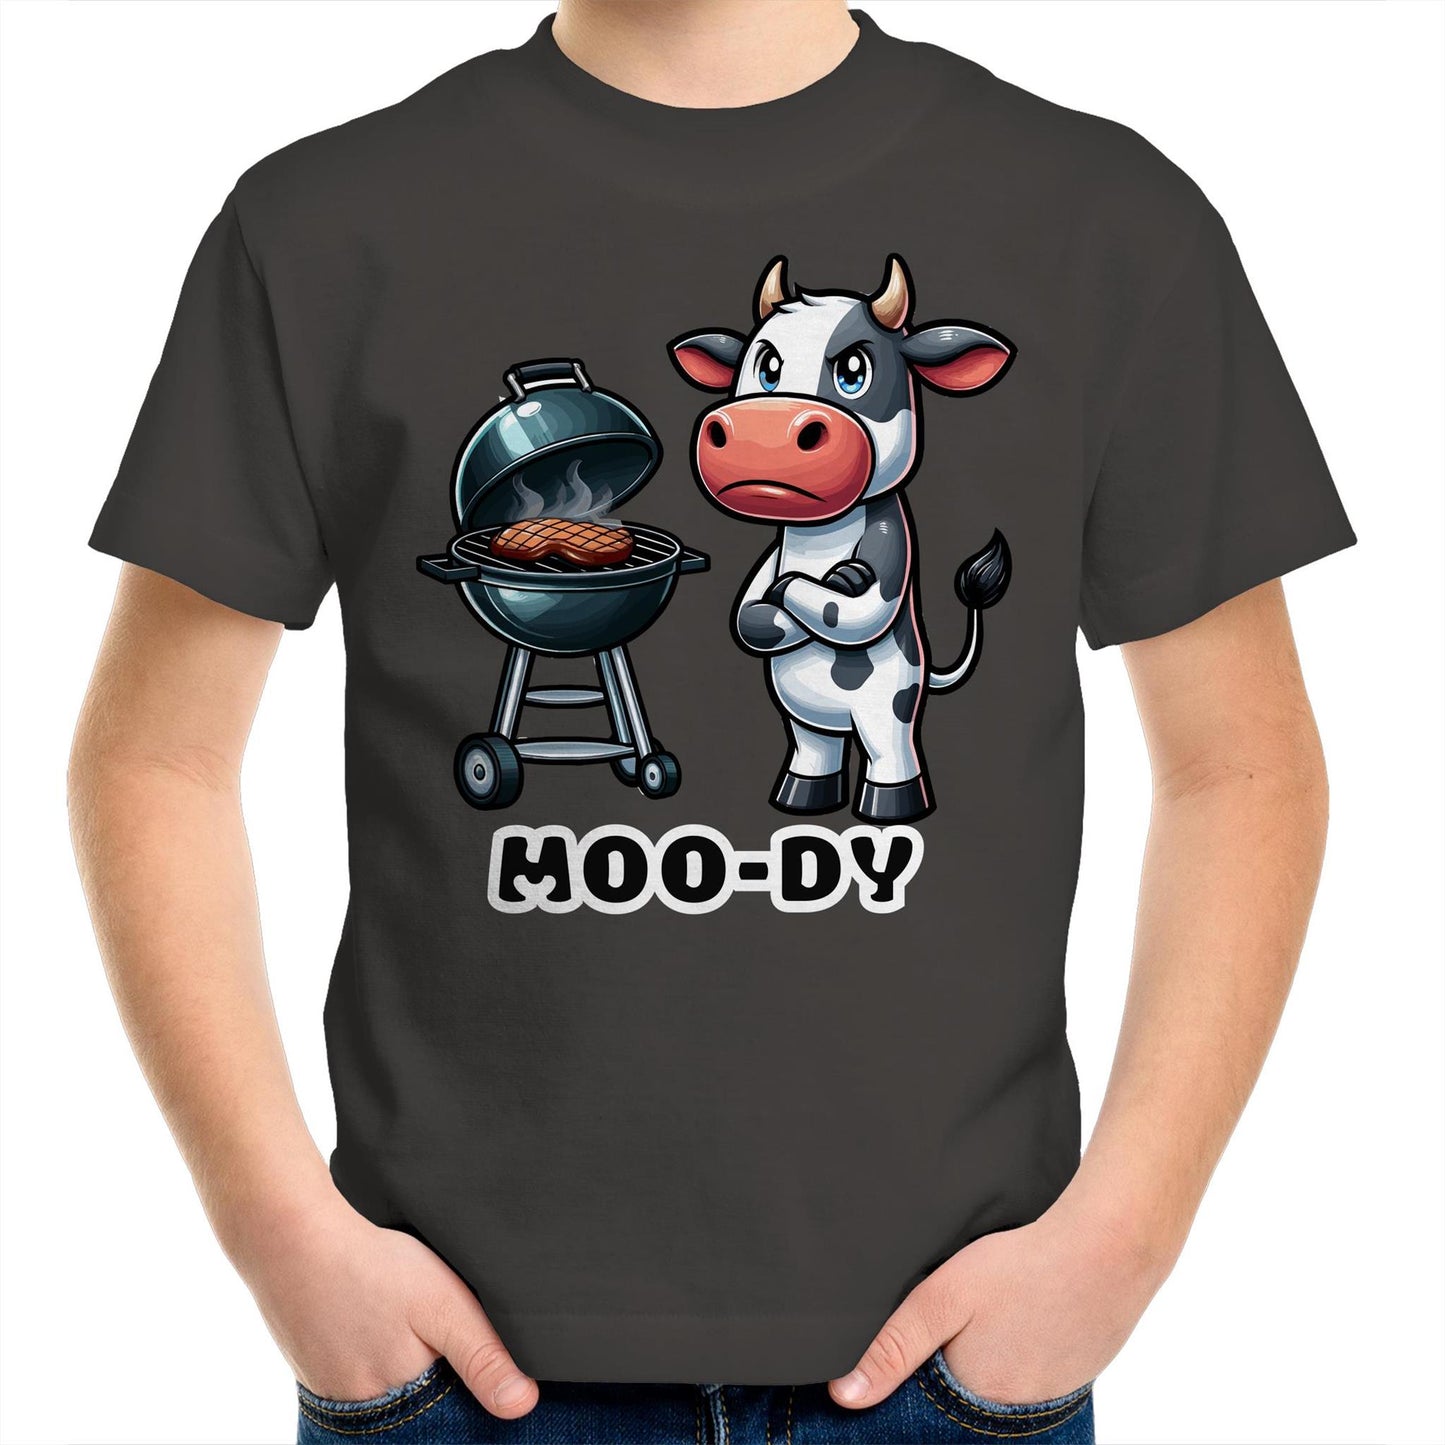 Moo-dy Cow - Kids Youth T-Shirt